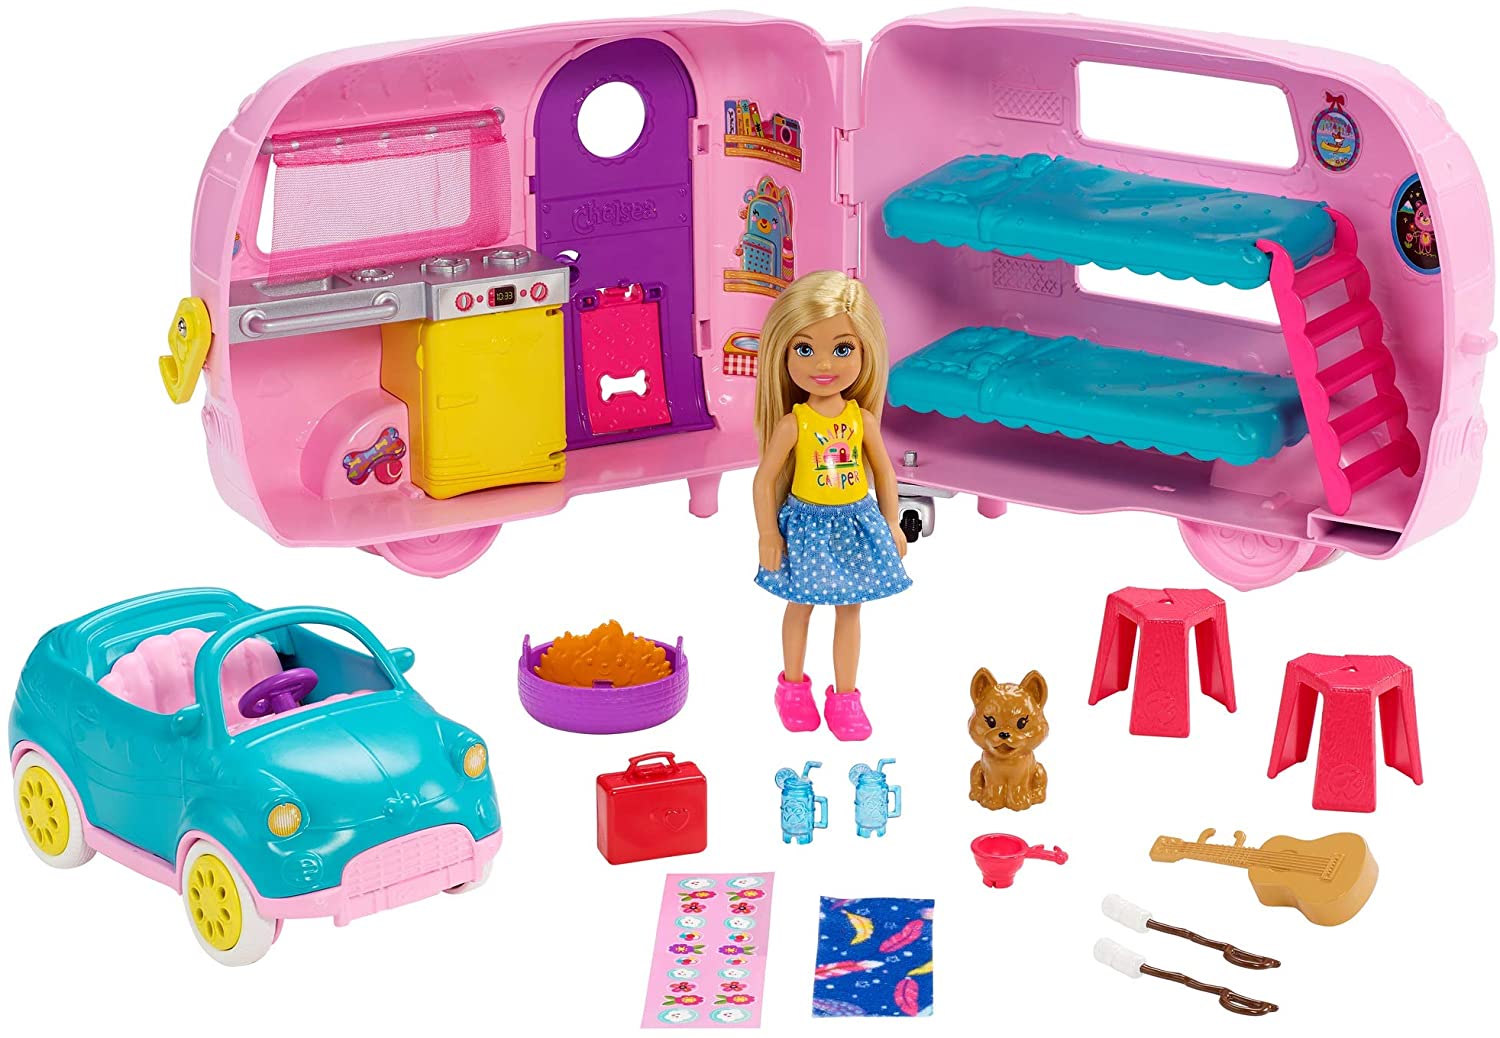 Barbie Chelsea Camper And Doll Play Set Or Food Truck Dolls Toy From 3 Year